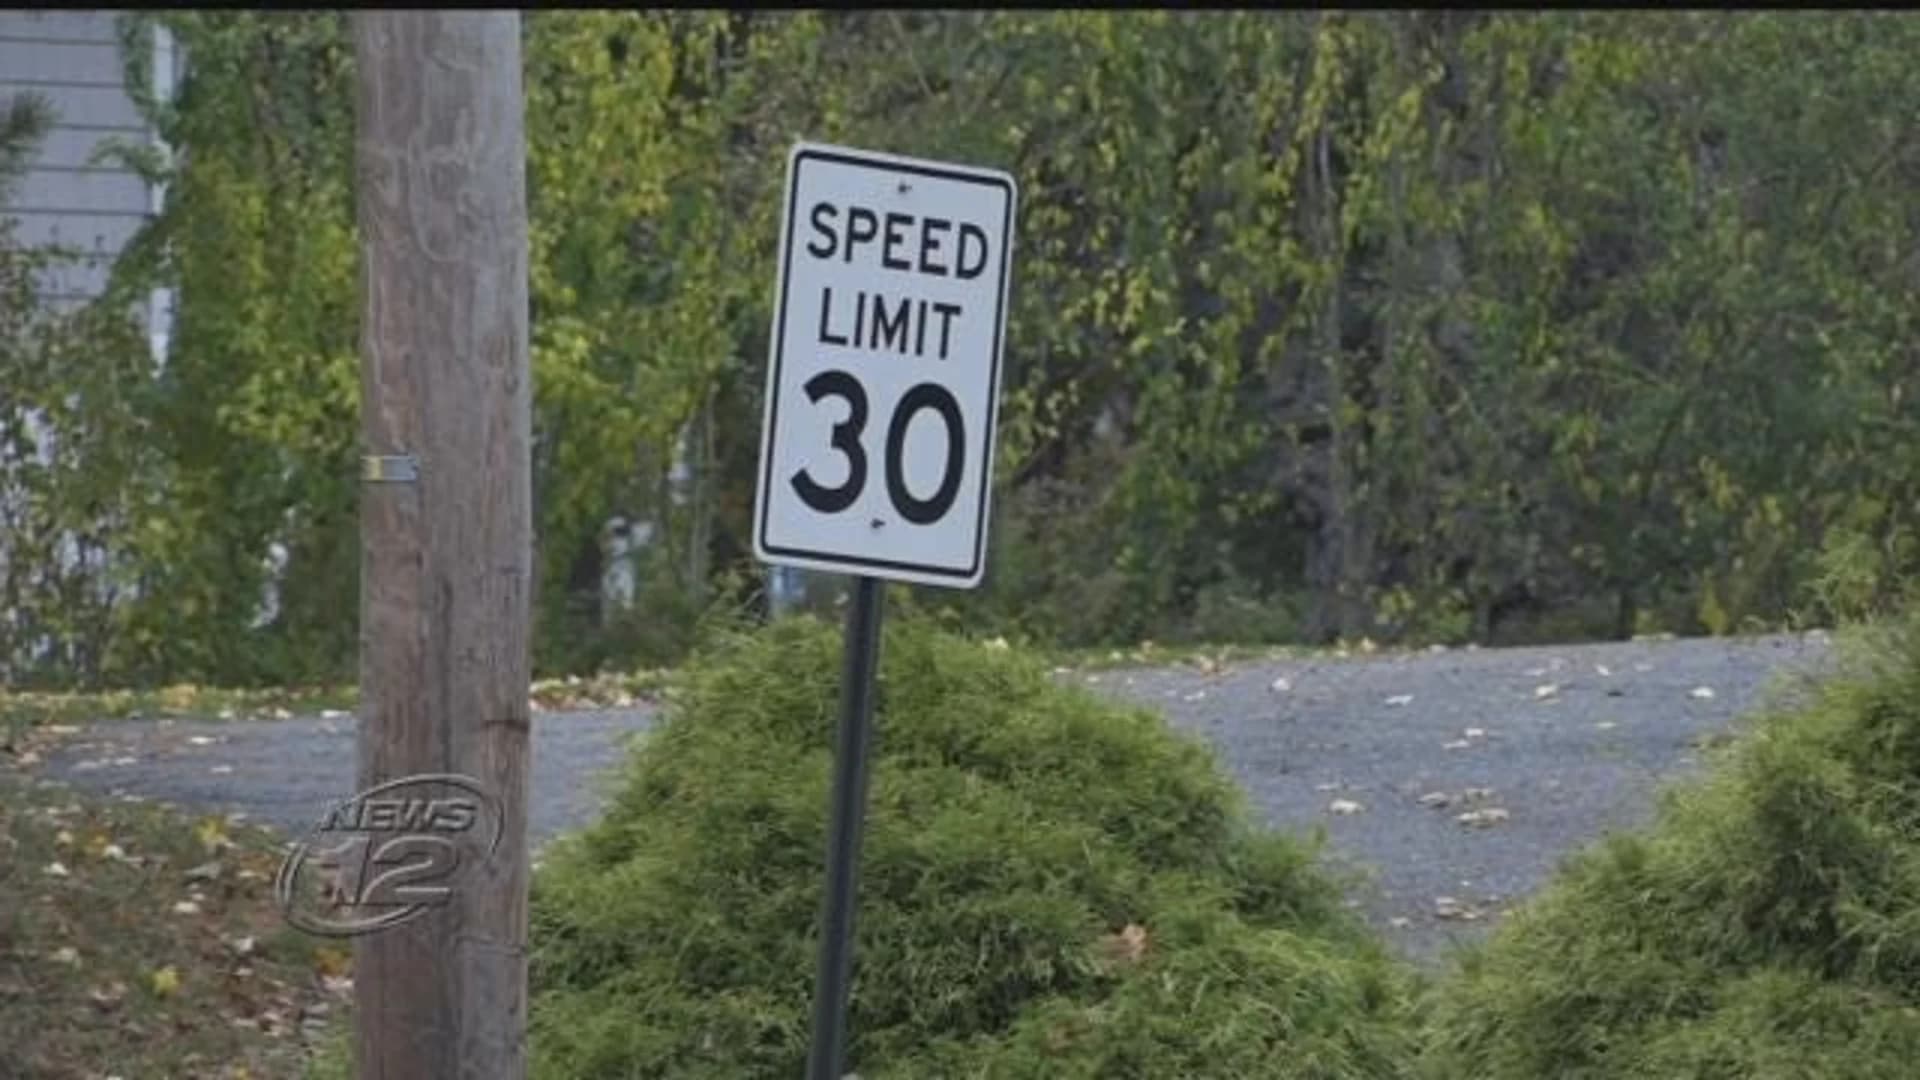 Montrose resident fears speeding cars down local road